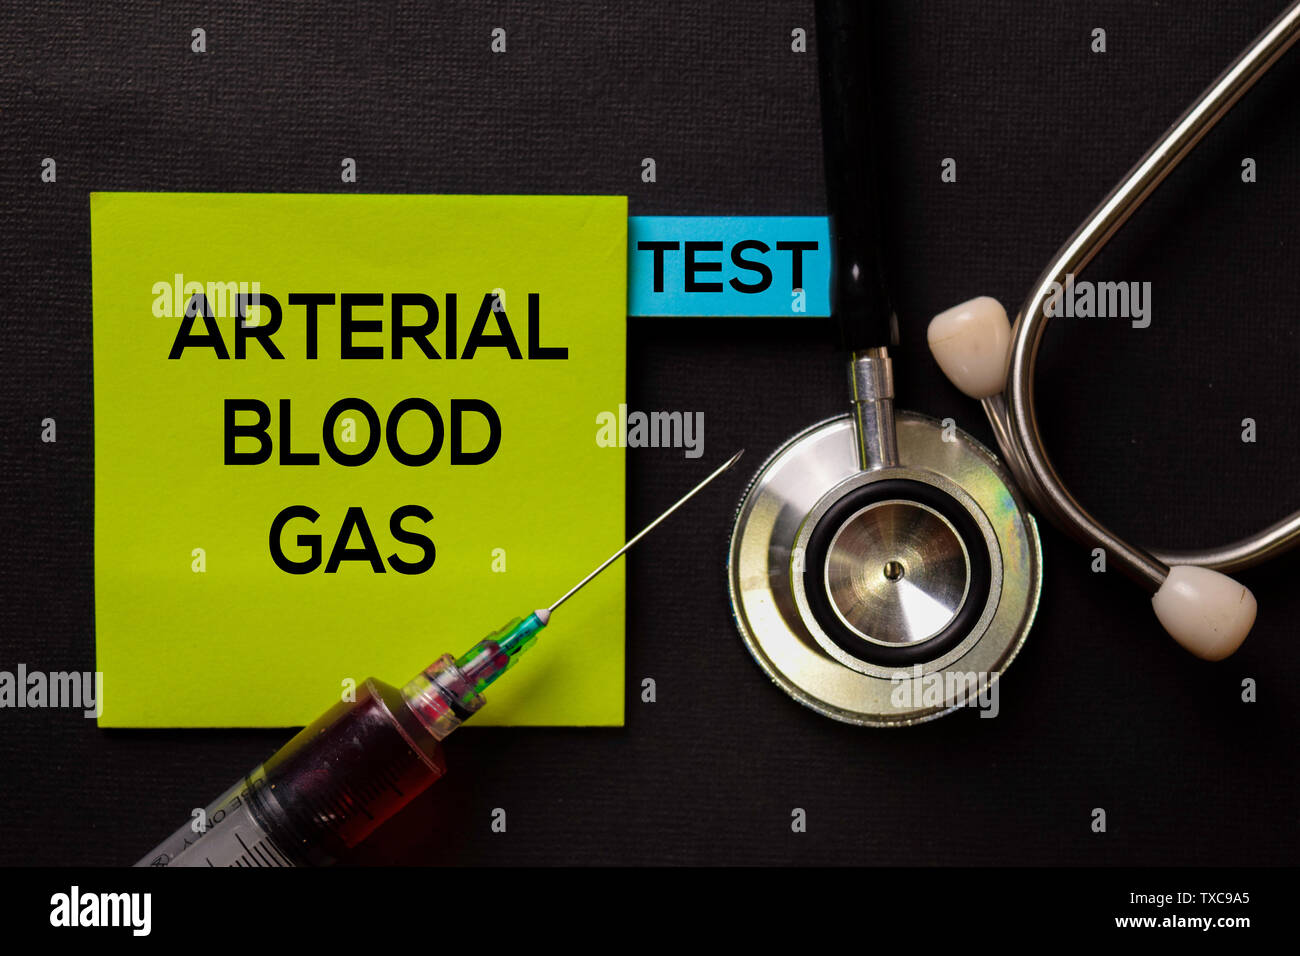 Arterial Blood Gas - Test on top view black table with blood sample and Healthcare/medical concept. Stock Photo